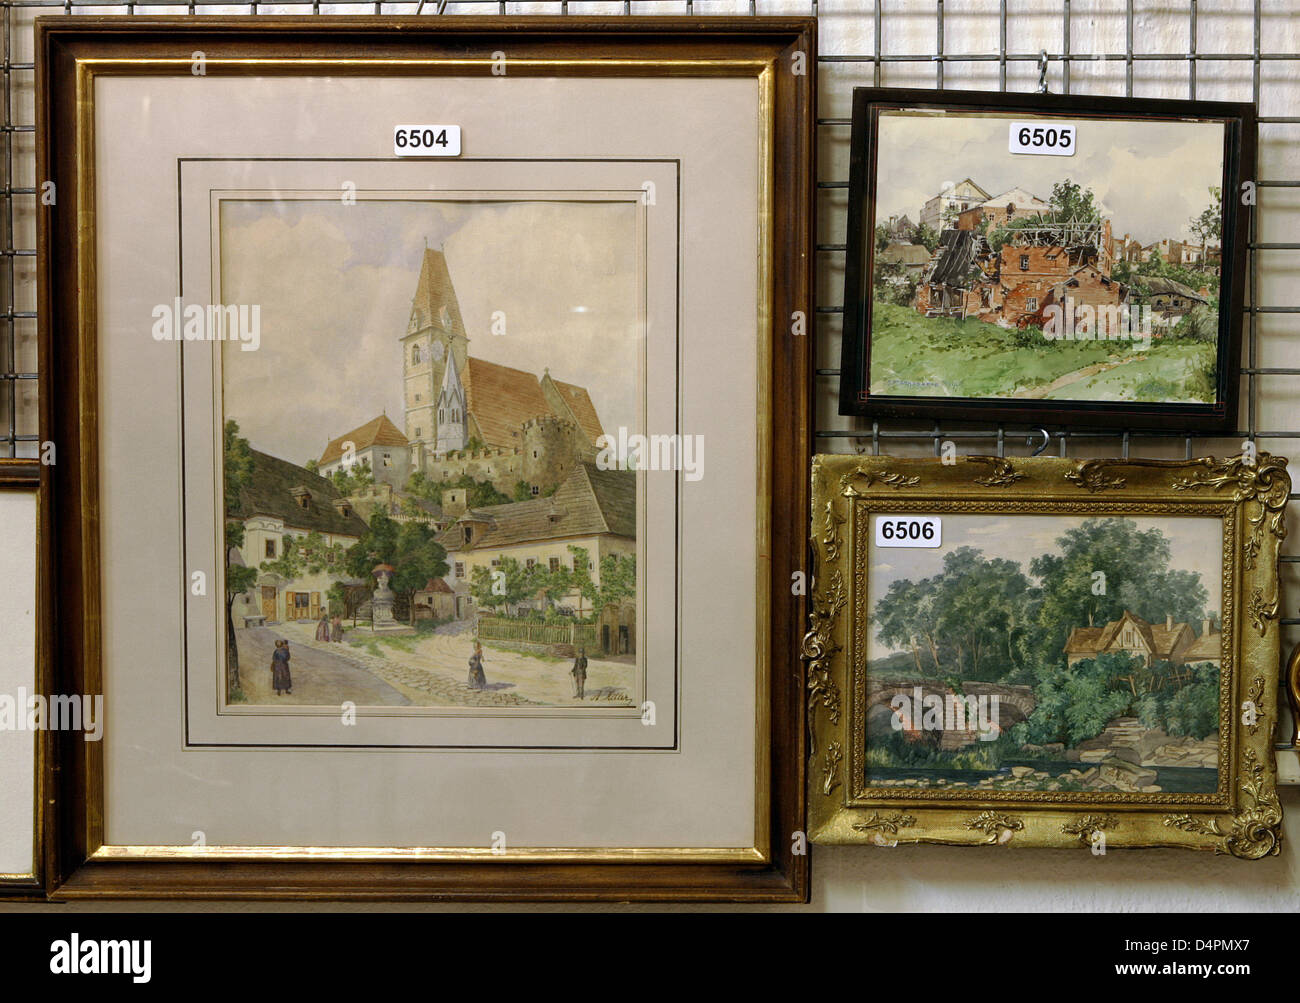 Three watercolours ?Zerschossene Muehle? (top R), ?Weissenkirchen in der Wachau? (L) and ?Haus mit Bruecke am Fluss? dated 1910 and 1911 by Adolf Hitler on display at an auction house in Nuremberg, Germany, 19 August 2009. The pieces will be auctioned at the beginning of September 2009. According to the auction house ?Weissenkirchen in der Wachau? had orginally been bought by a Jew Stock Photo